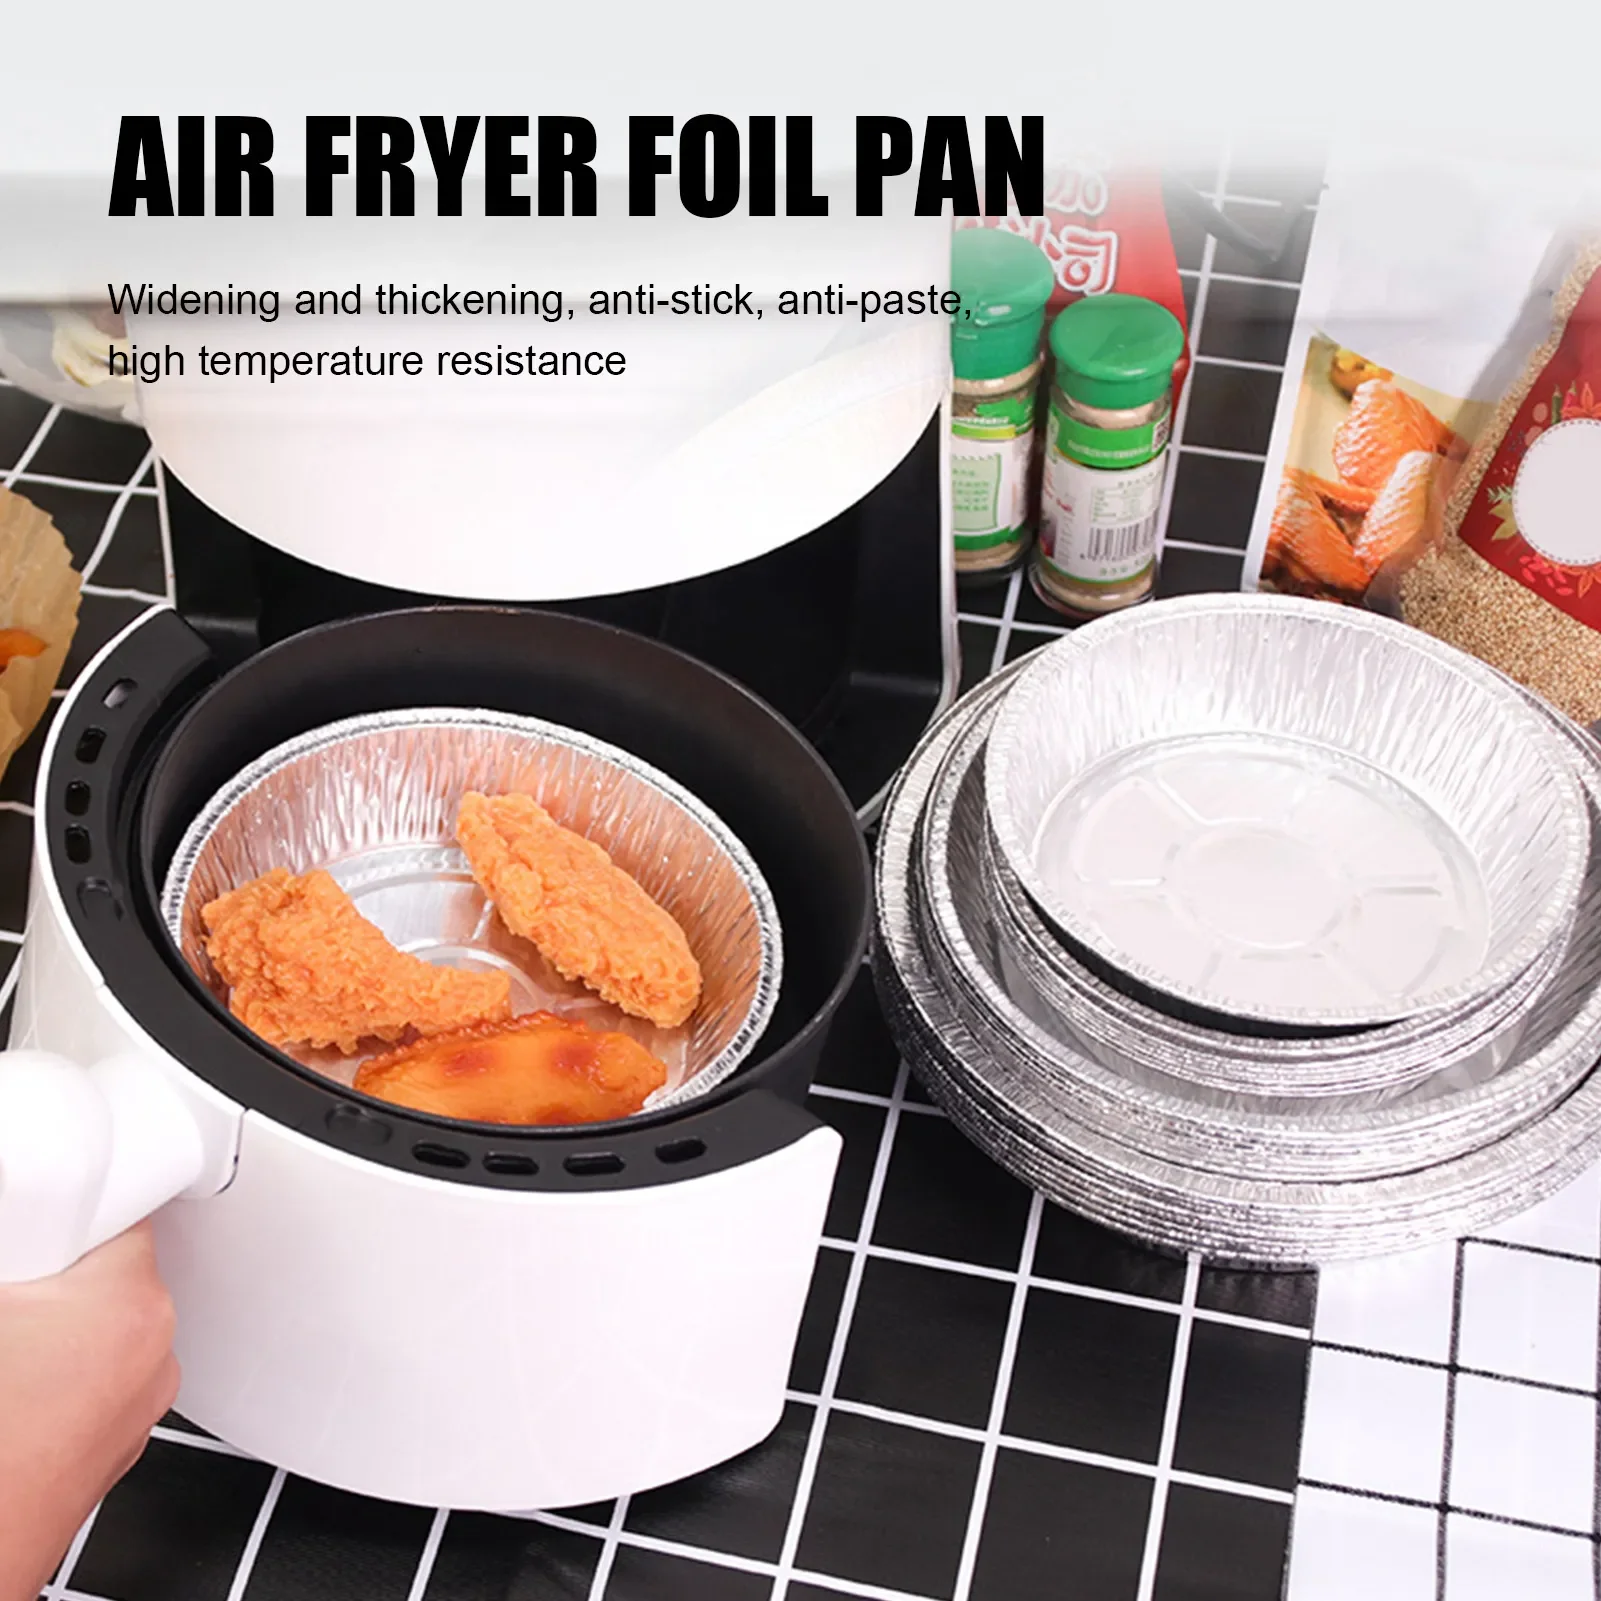 

Aluminum Foil Trays Convenient Food Foil Pans Food Foil Containers For Air Fryer Baking Storing Reheating Meal Prep Easy